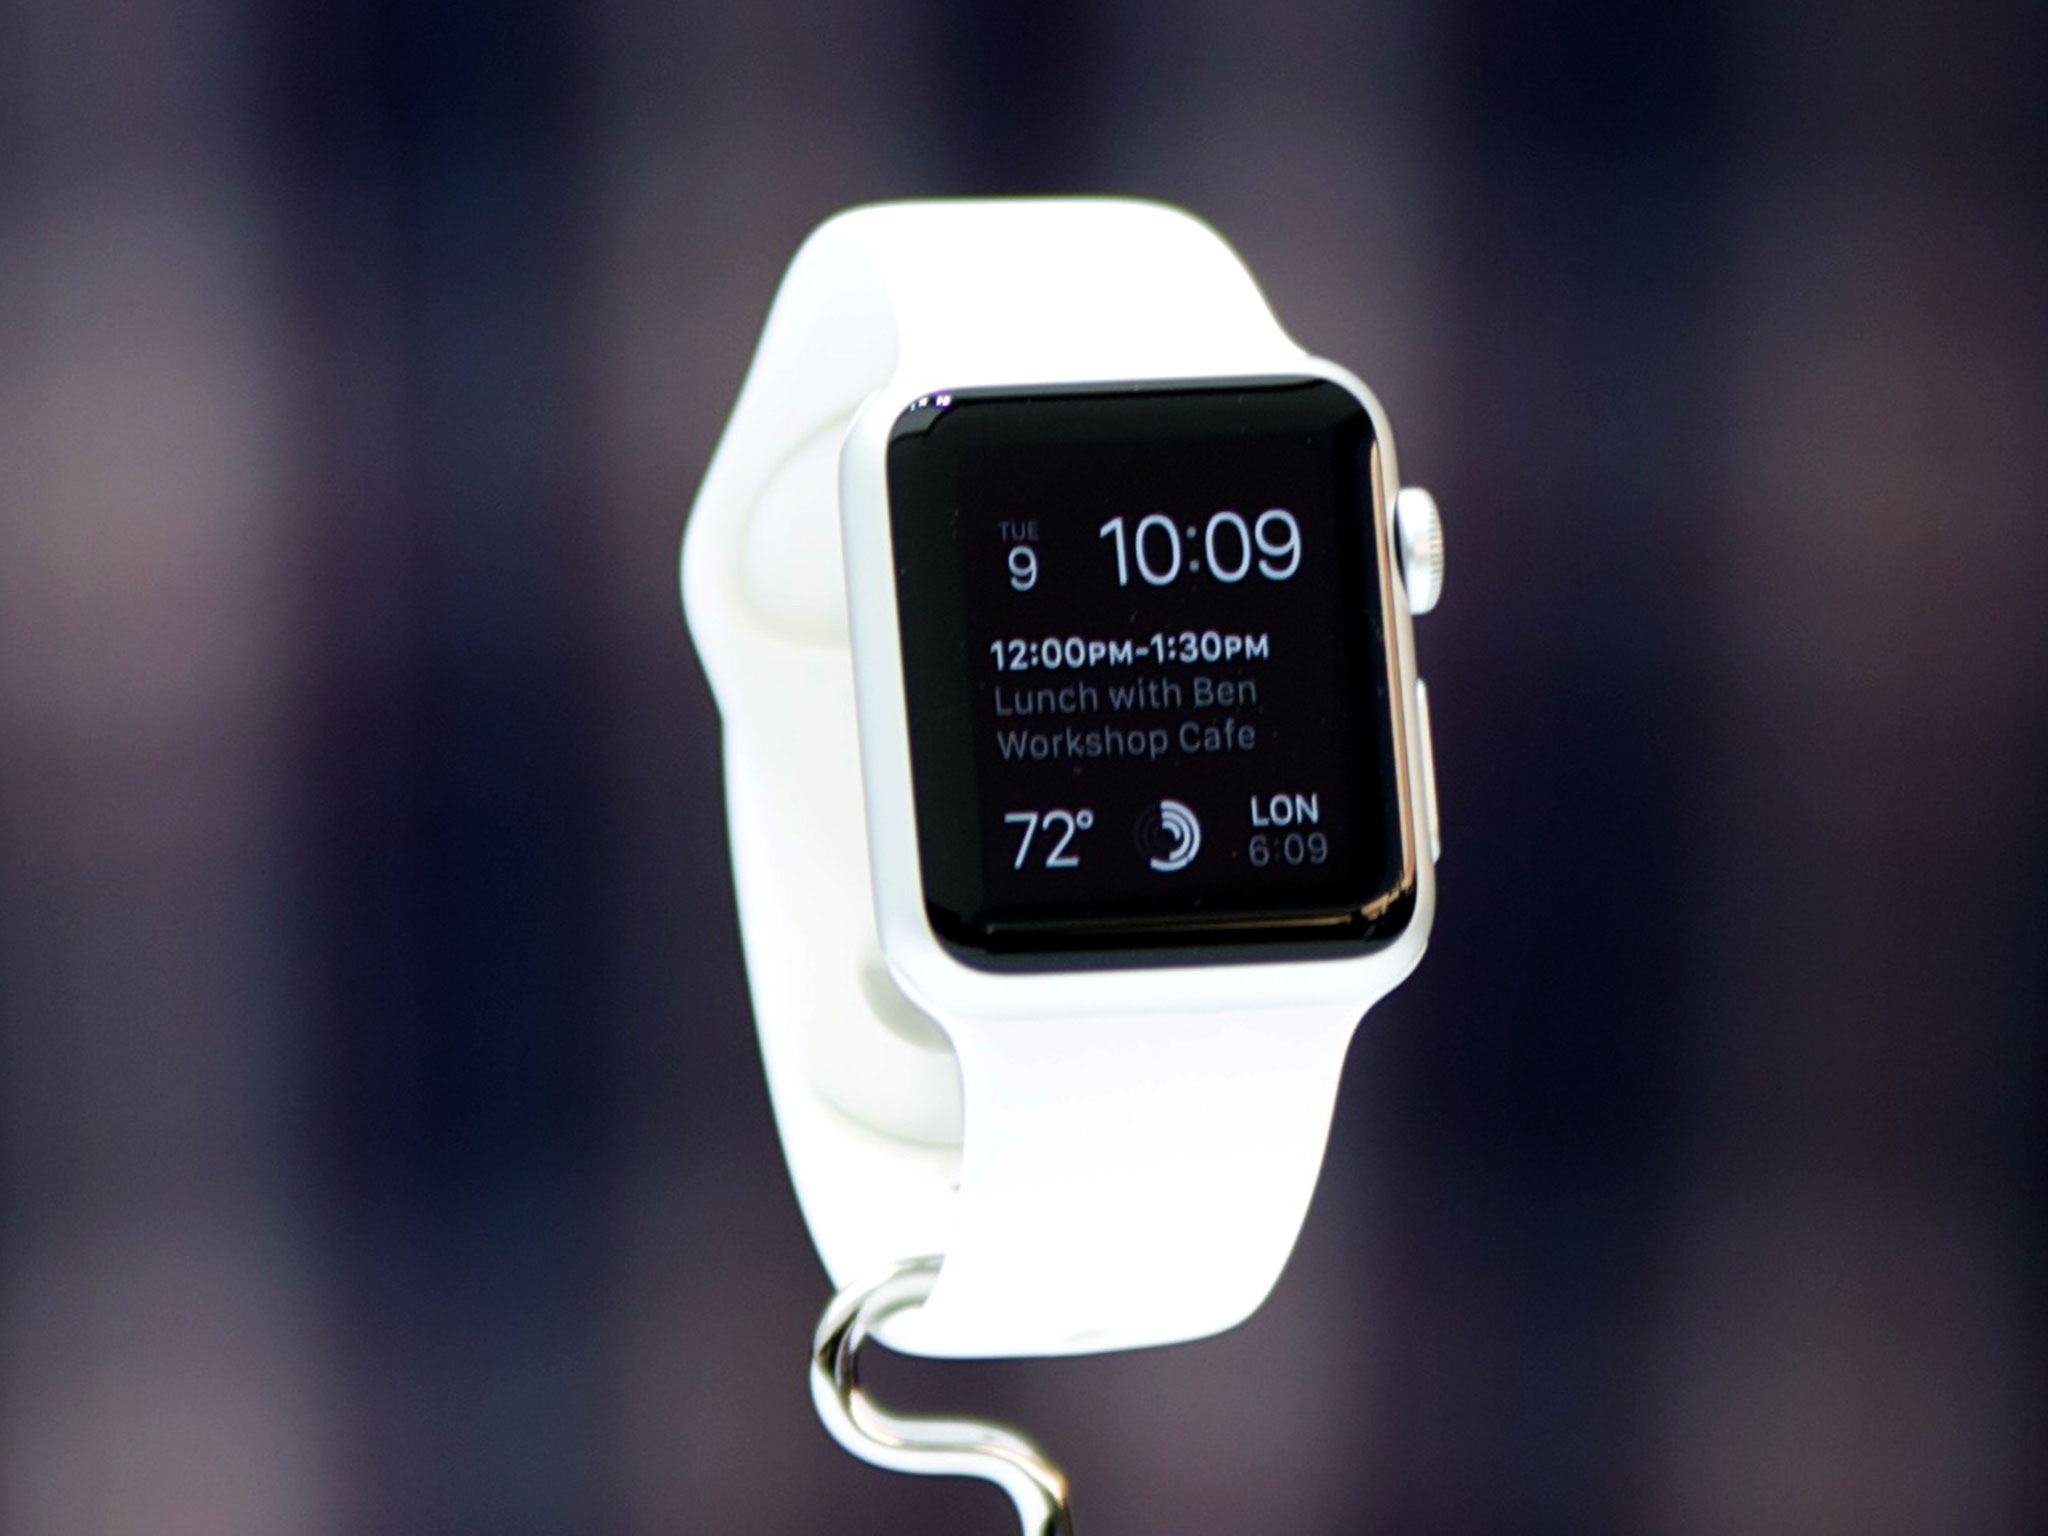 Should you buy an Apple Watch now or wait for the next generation?